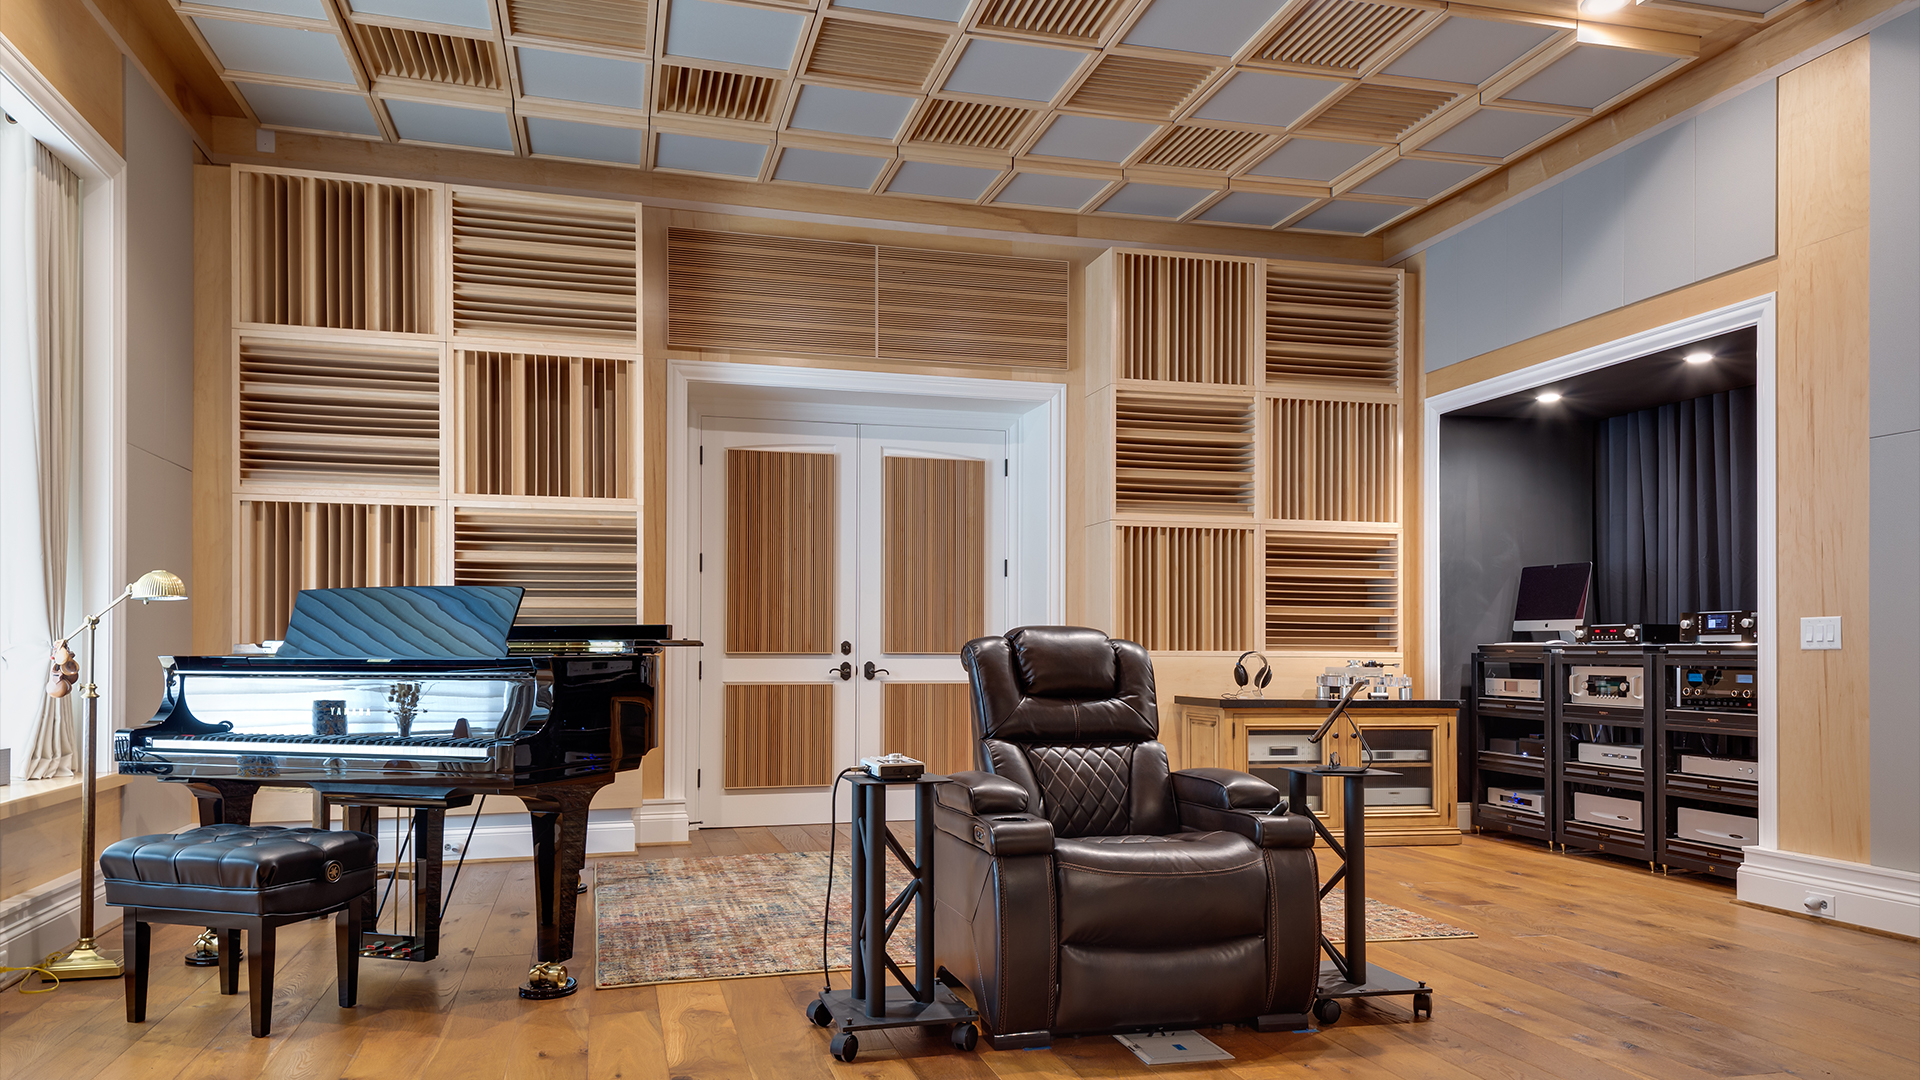 acoustically treated listening room with seat, piano and sound diffusers on the walls